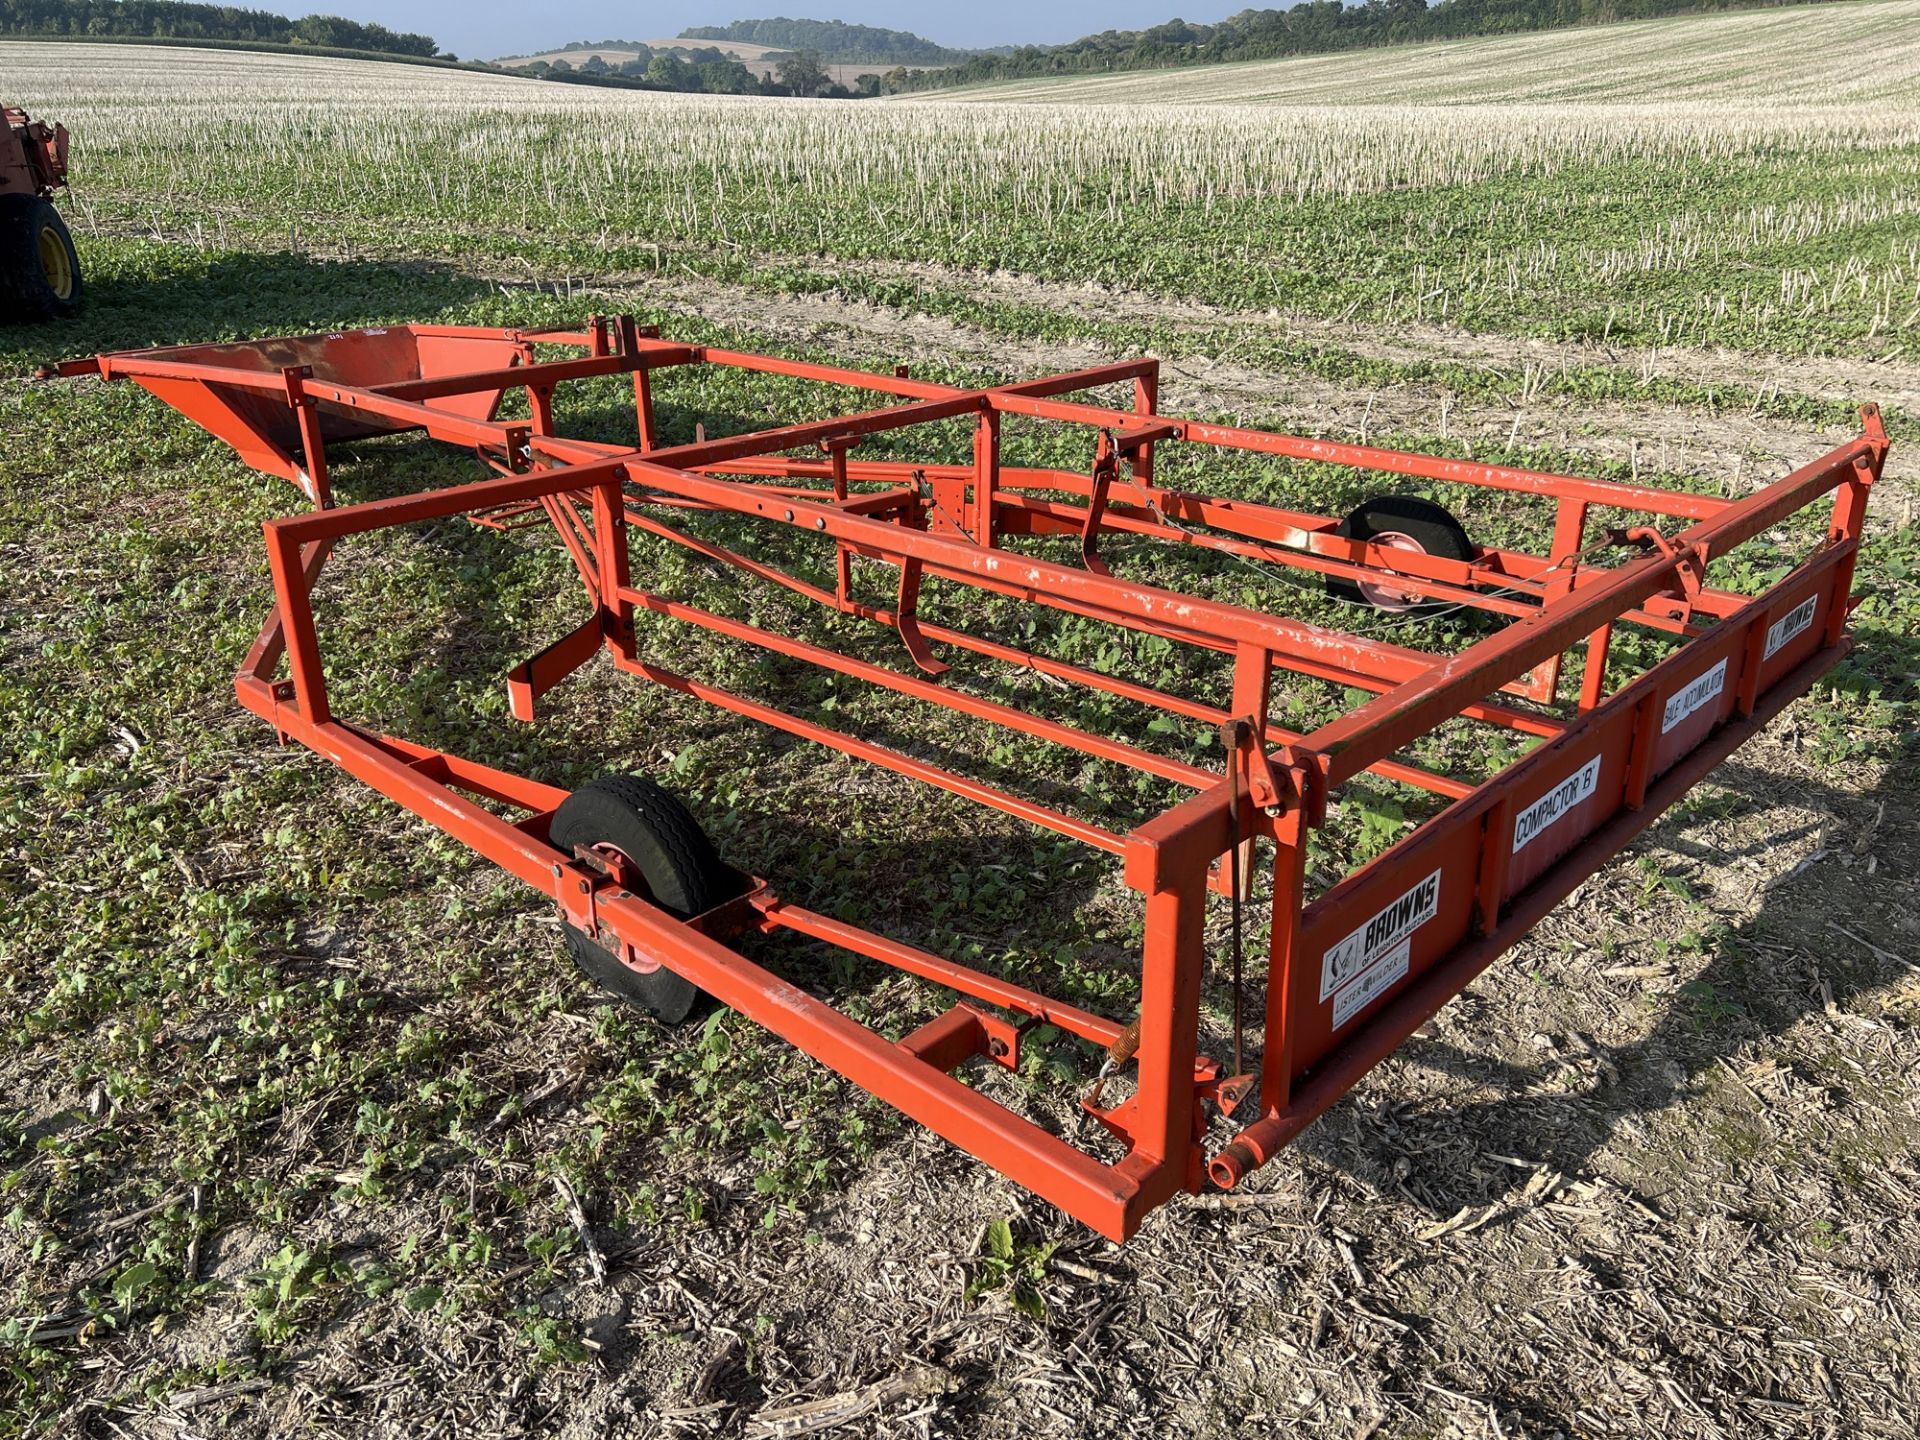 Browns flat 8 bale sledge - Image 2 of 4